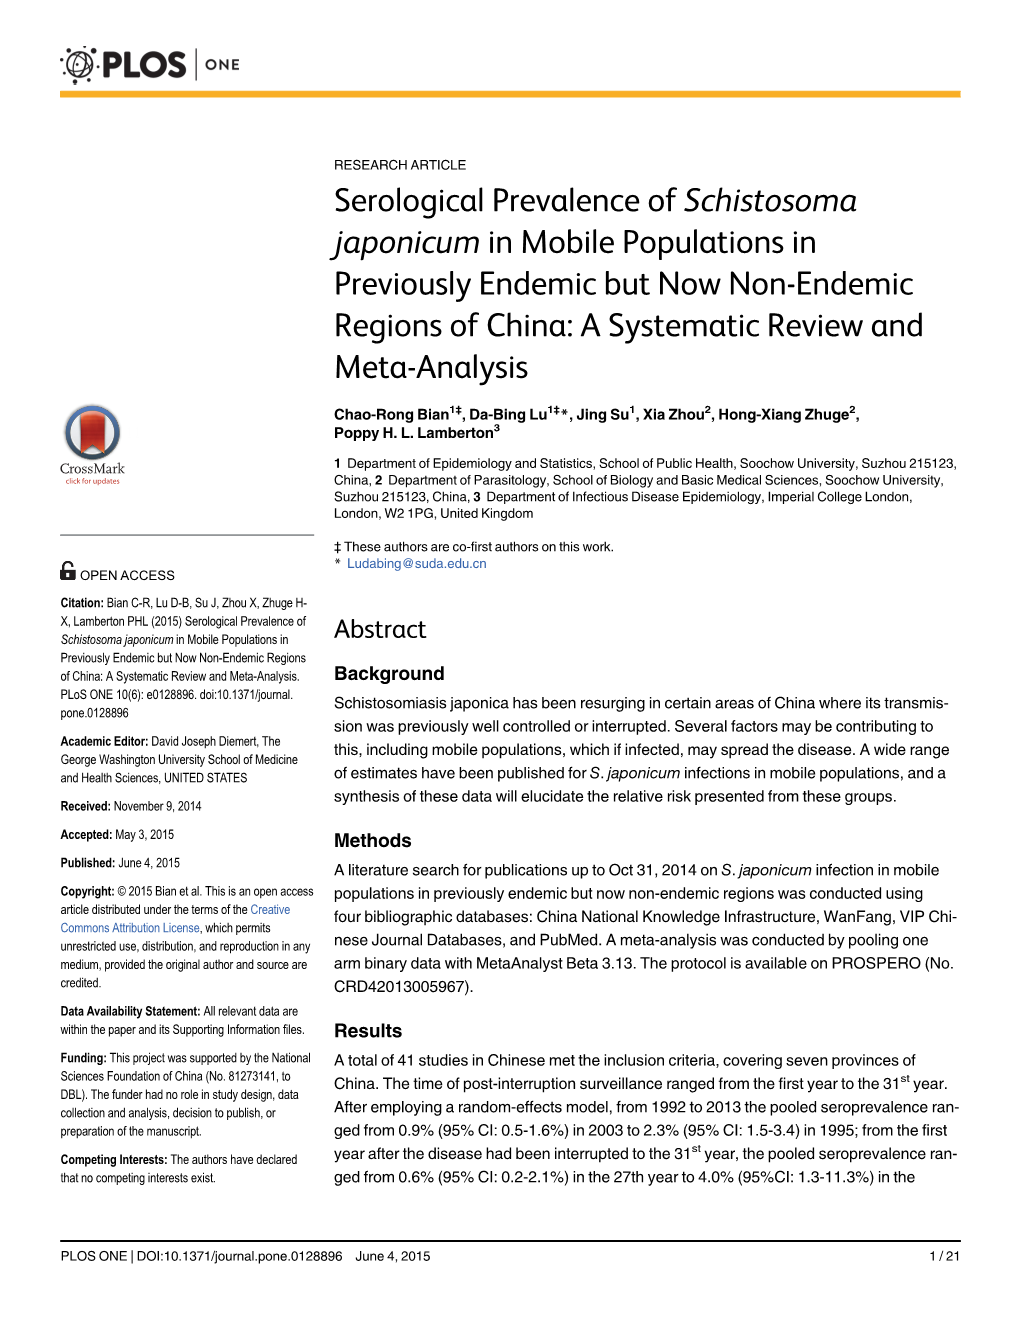 Serological Prevalence of Schistosoma Japonicum in Mobile Populations in Previously Endemic but Now Non-Endemic Regions of China